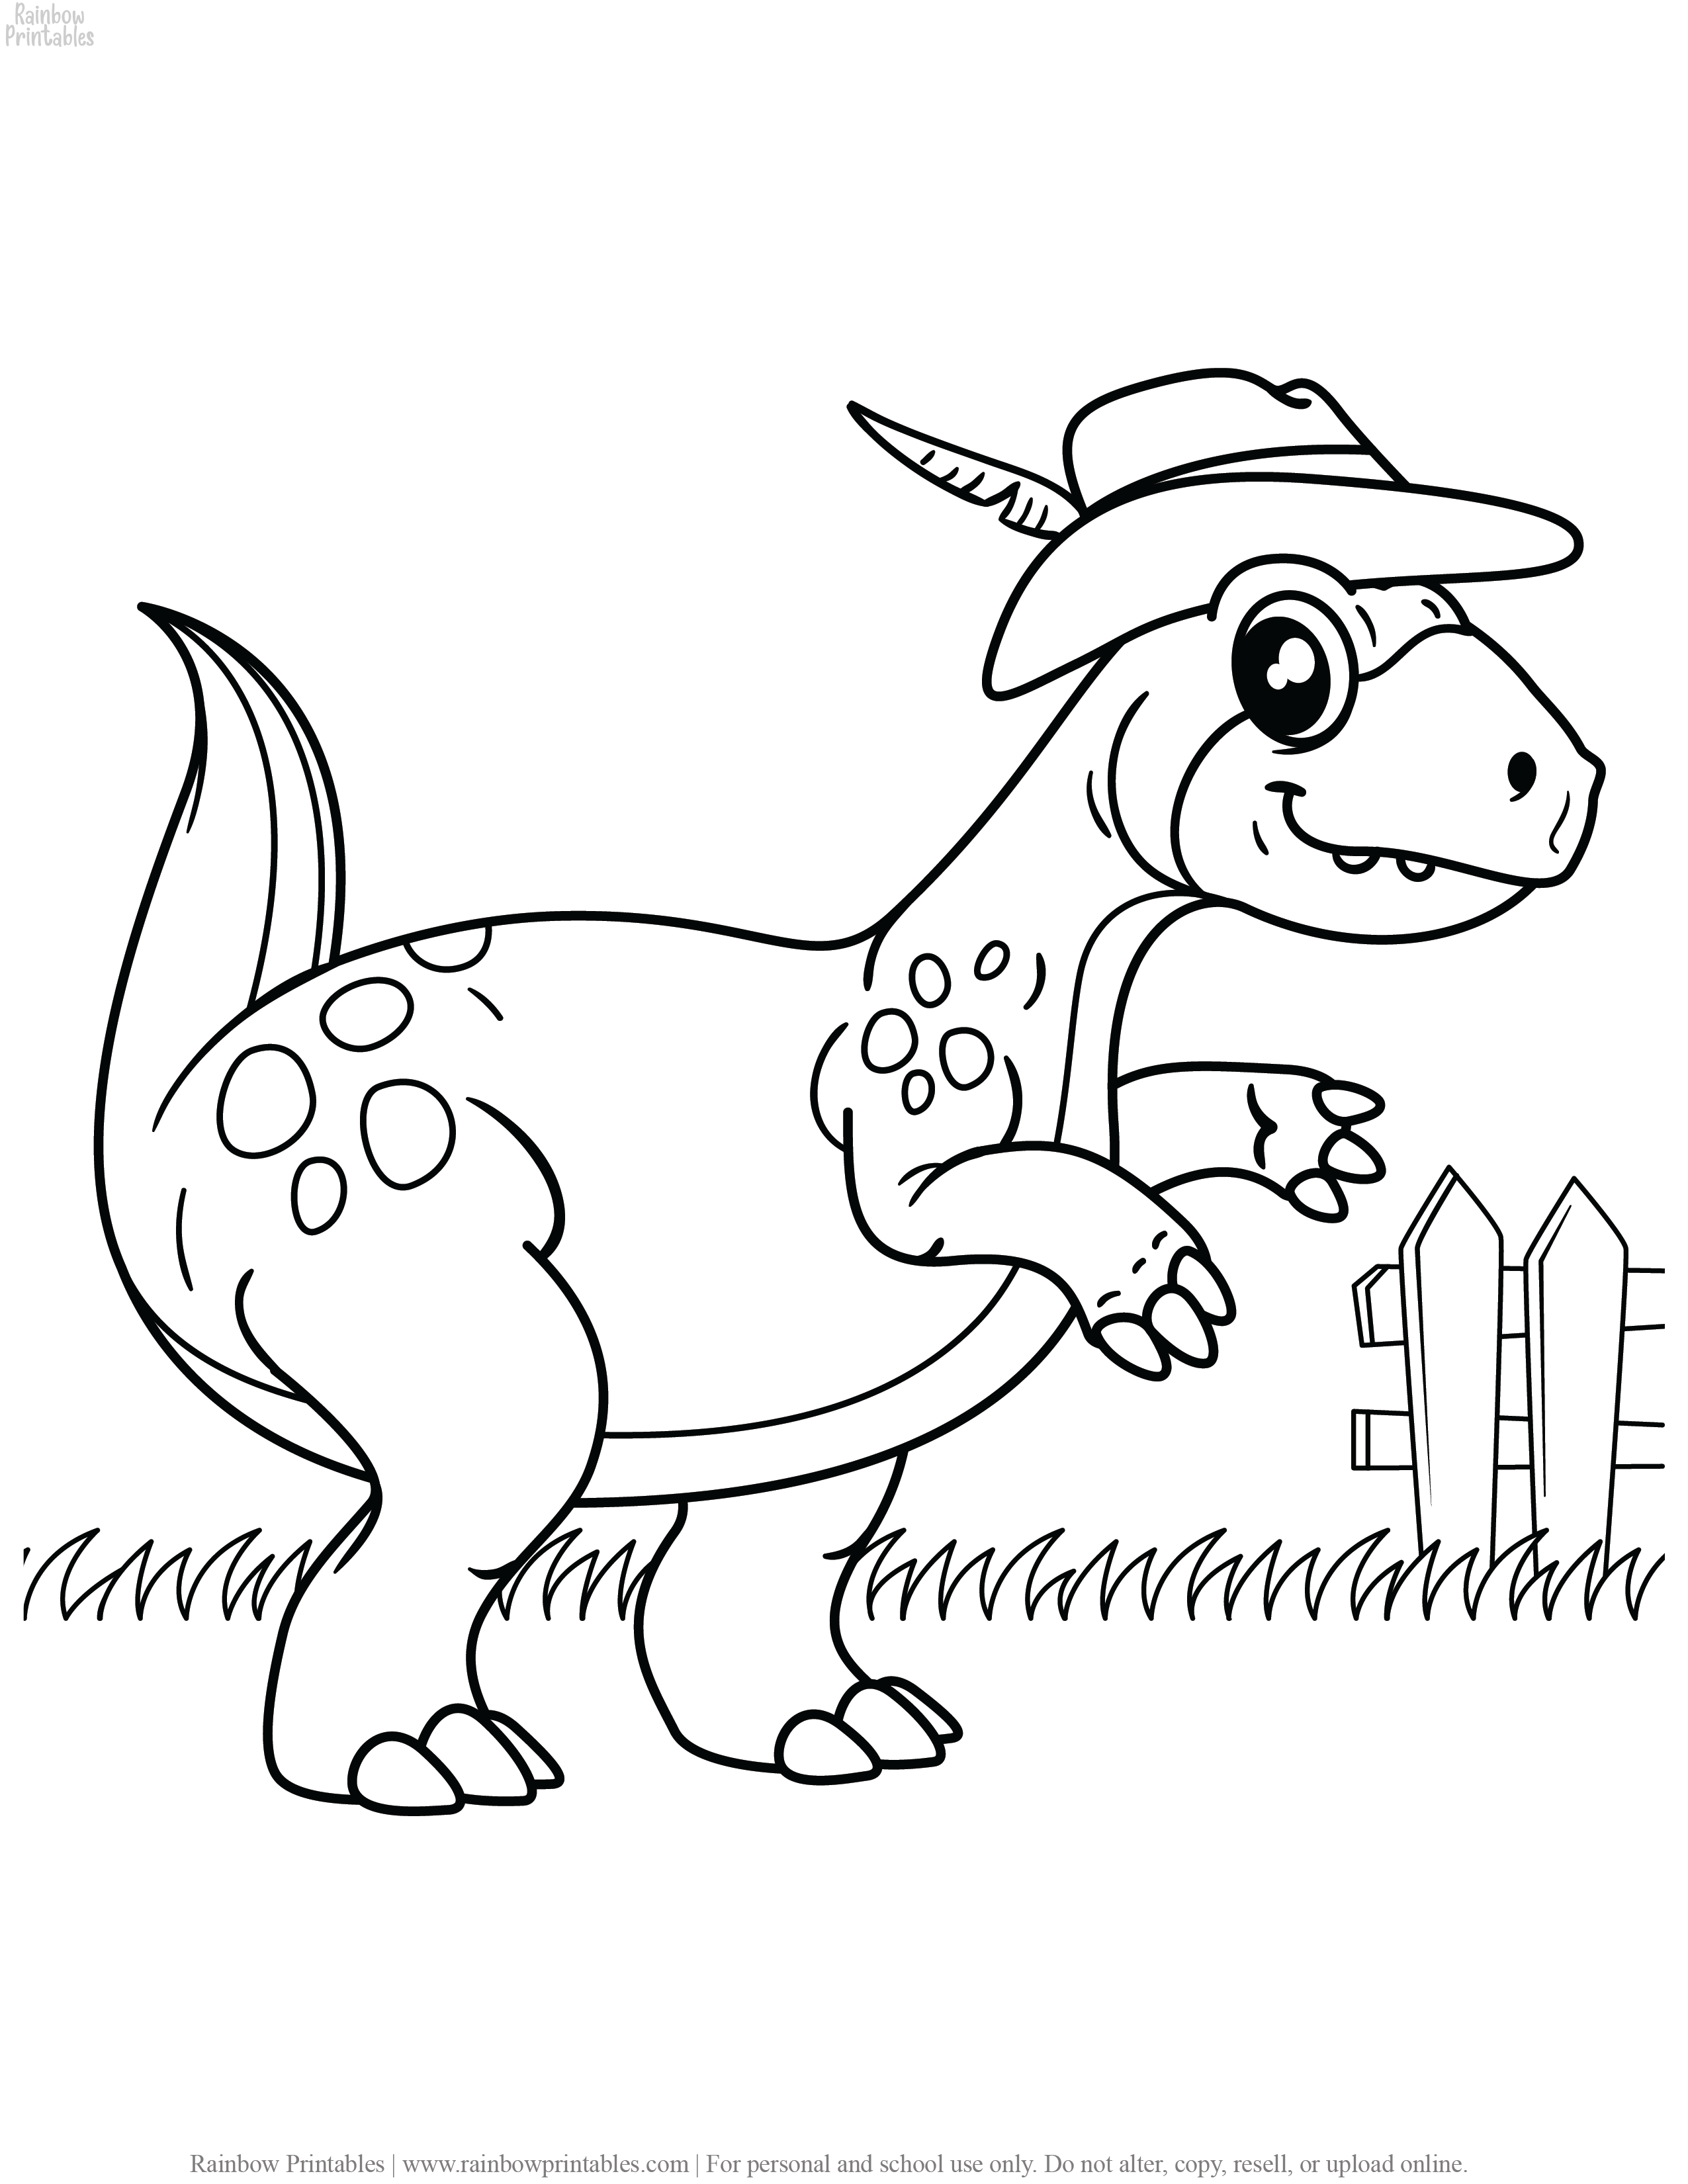 Coloring Pages For Boys Rainbow Printables